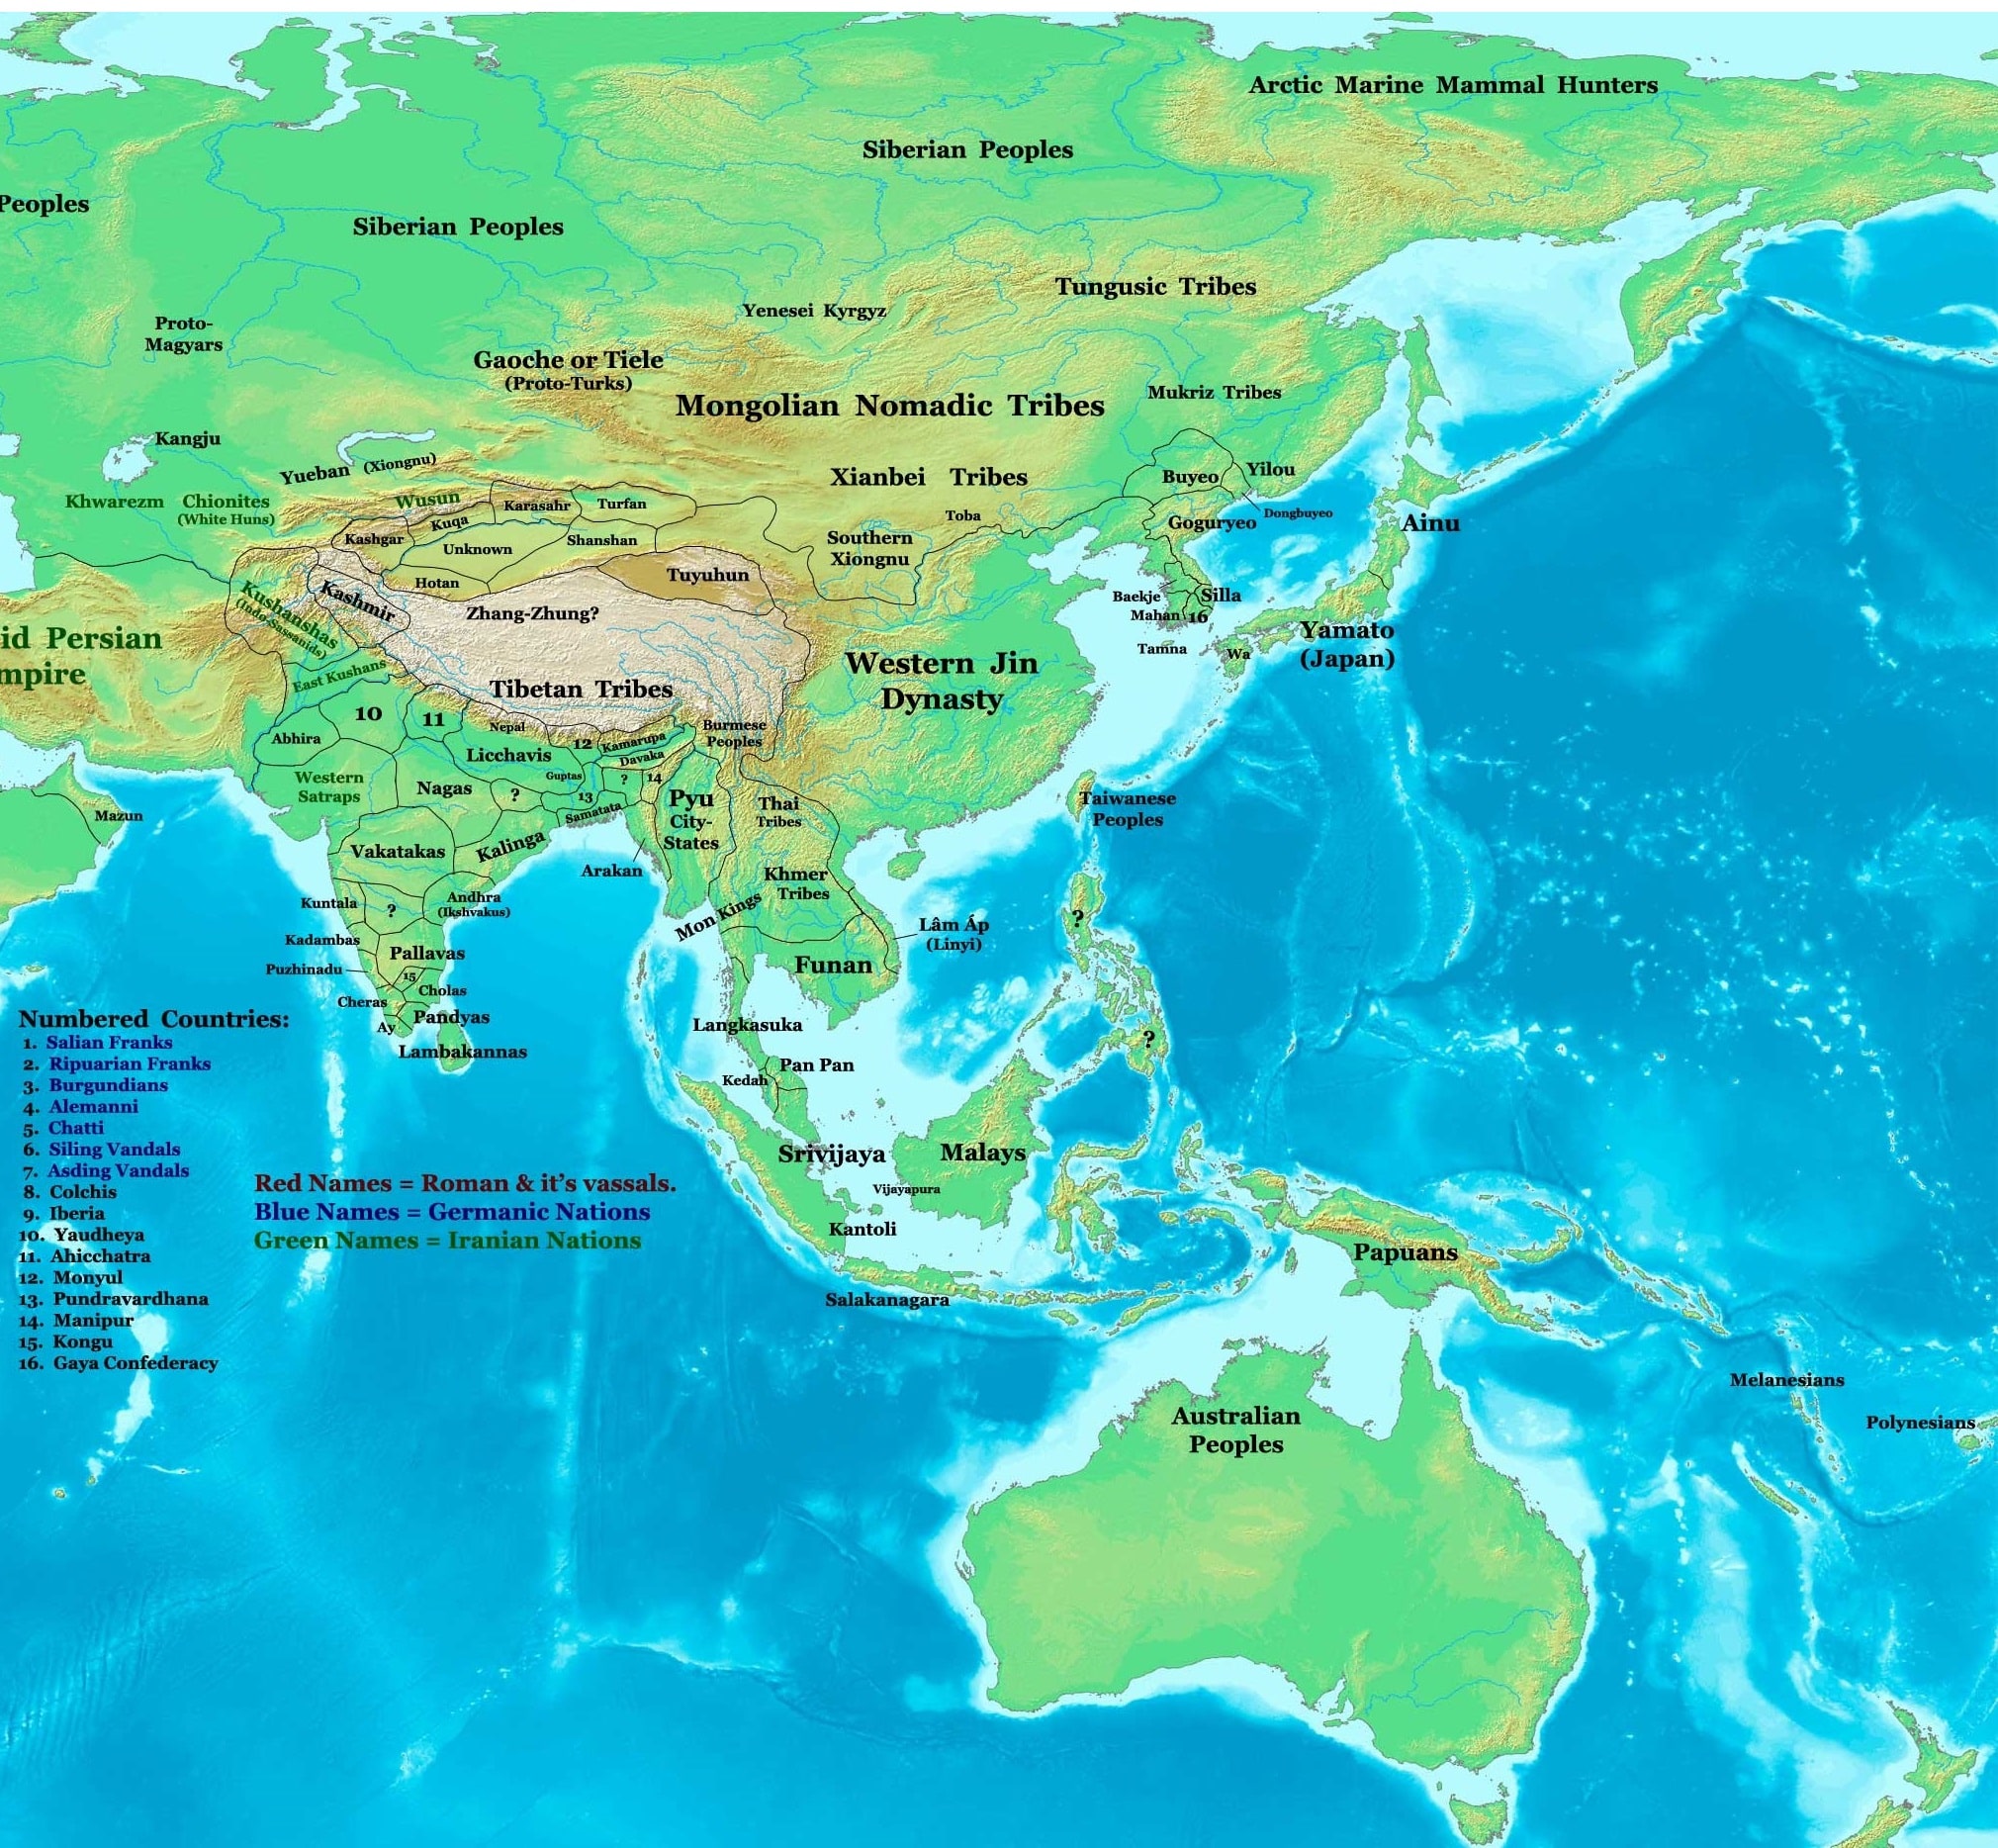 Biography of Genghis Khan - Map of Asia and Australia (Ca. 300 A.D.)